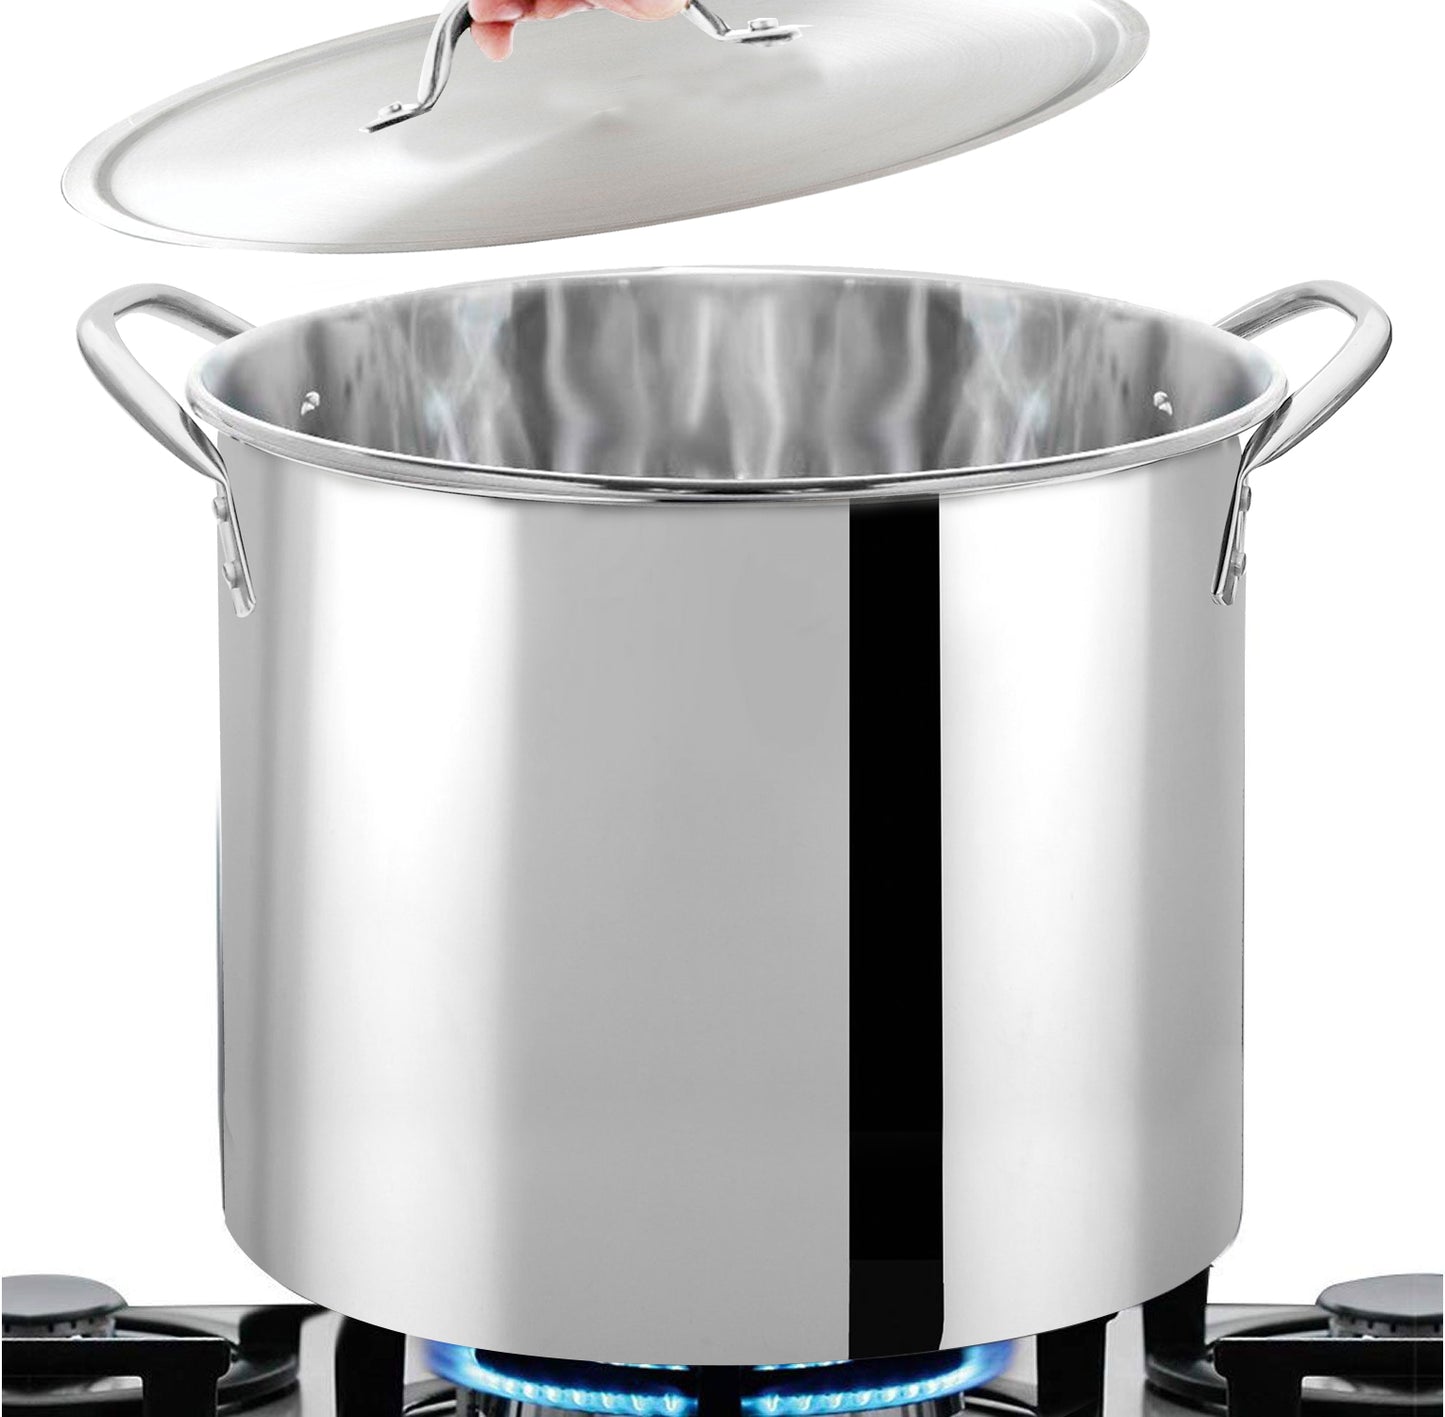 Bene Casa 60Qt Stainless Steel Boiling Pot with Strainer Basket and Lid